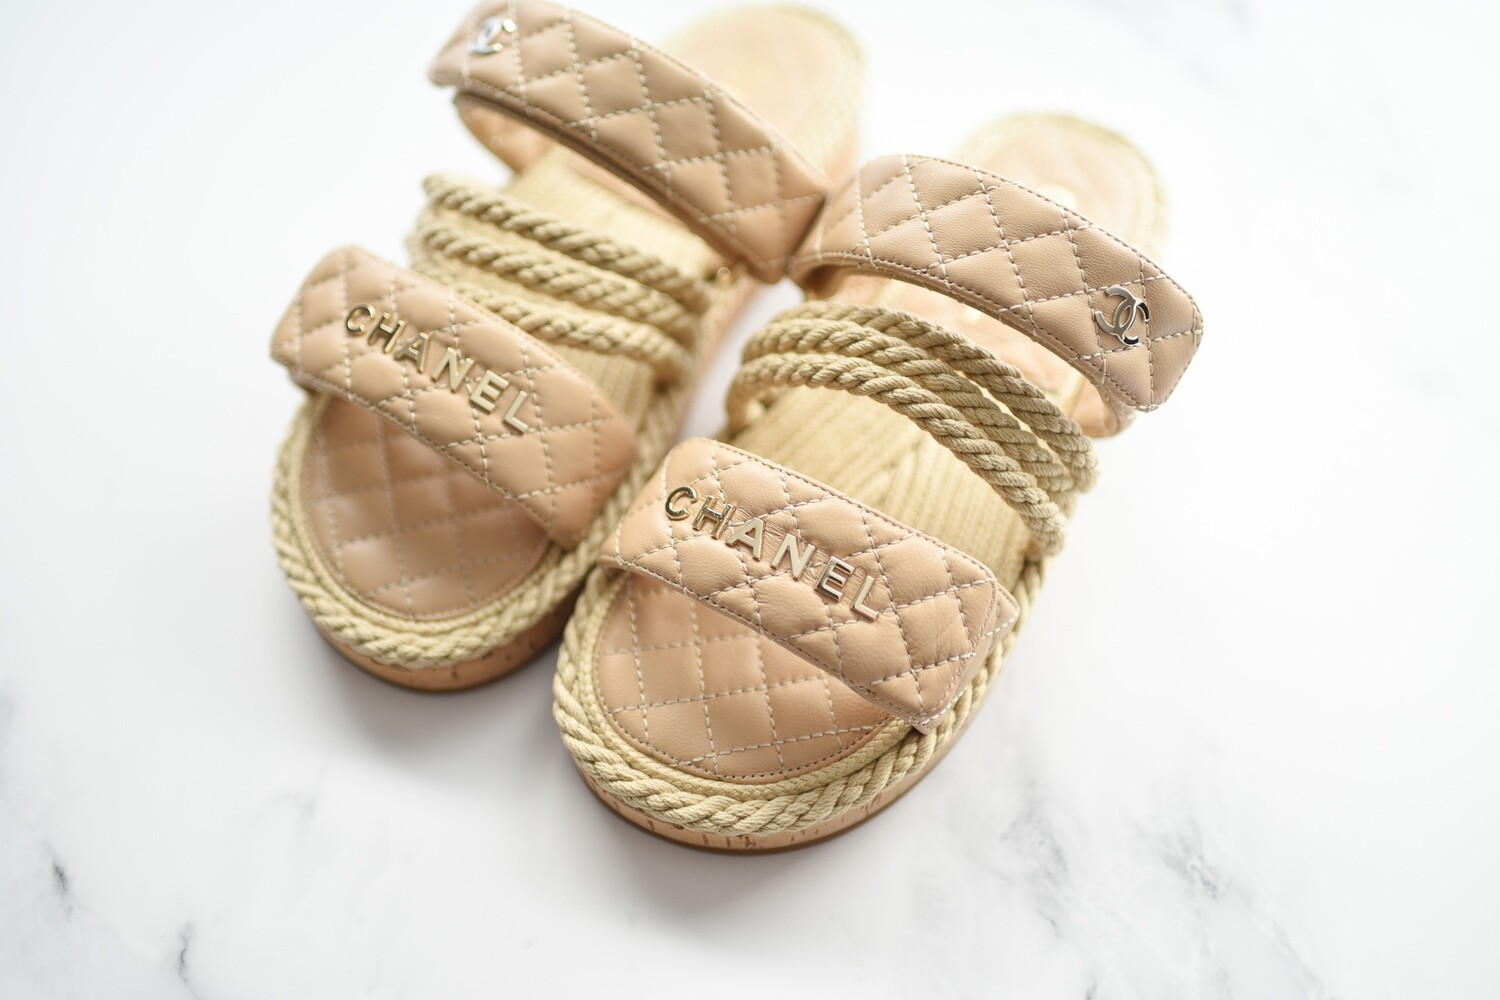 Chanel Rope Sandals, Beige, Size 37, New in Box GA001